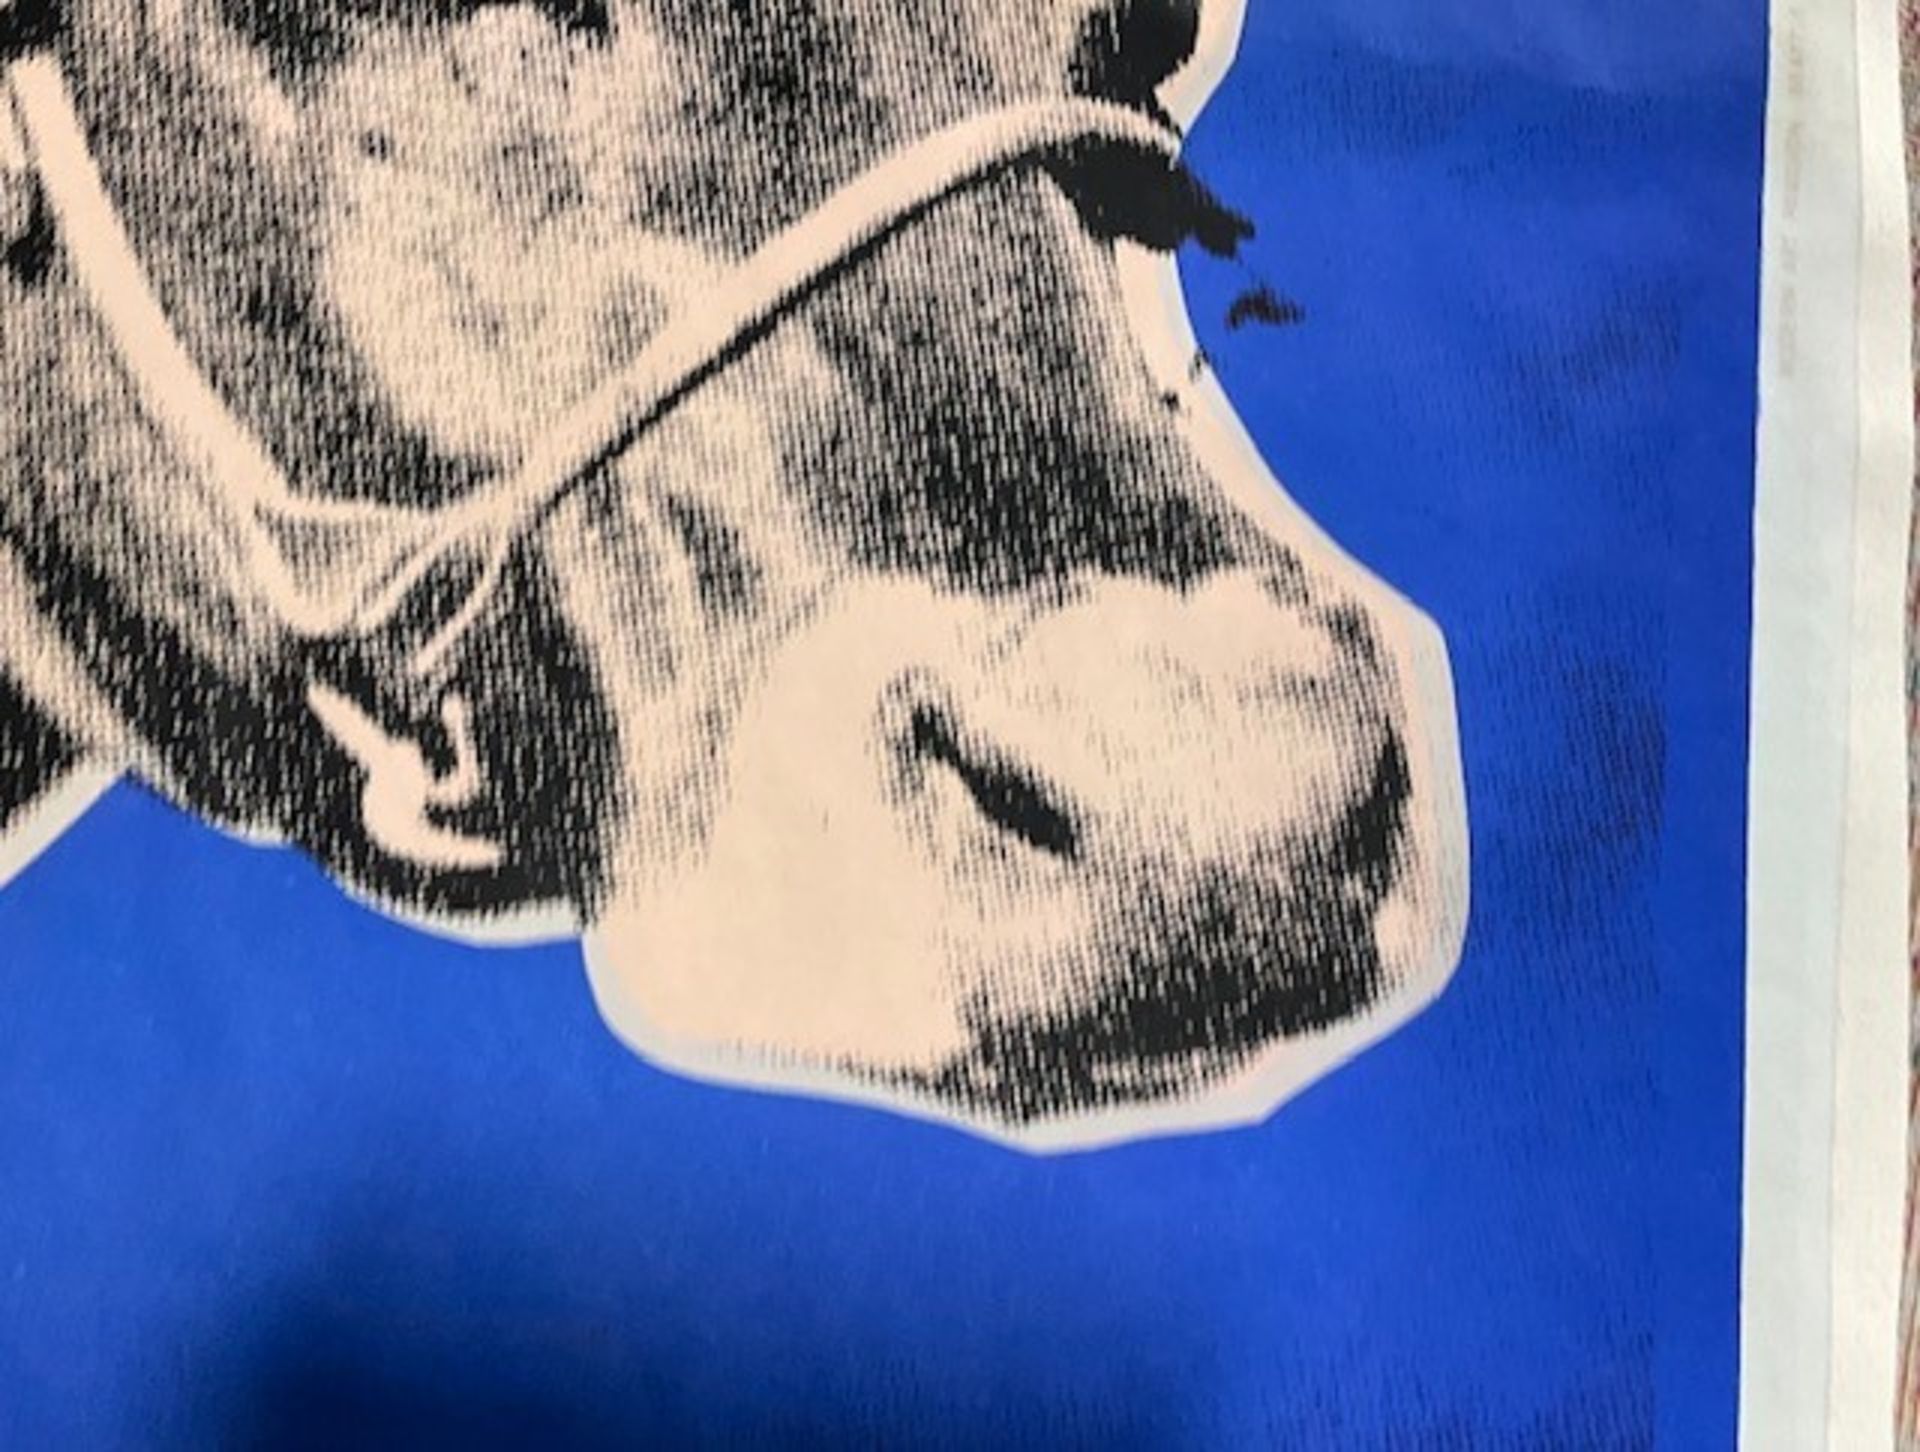 Andy Warhol Cow Wallpaper - Image 5 of 9